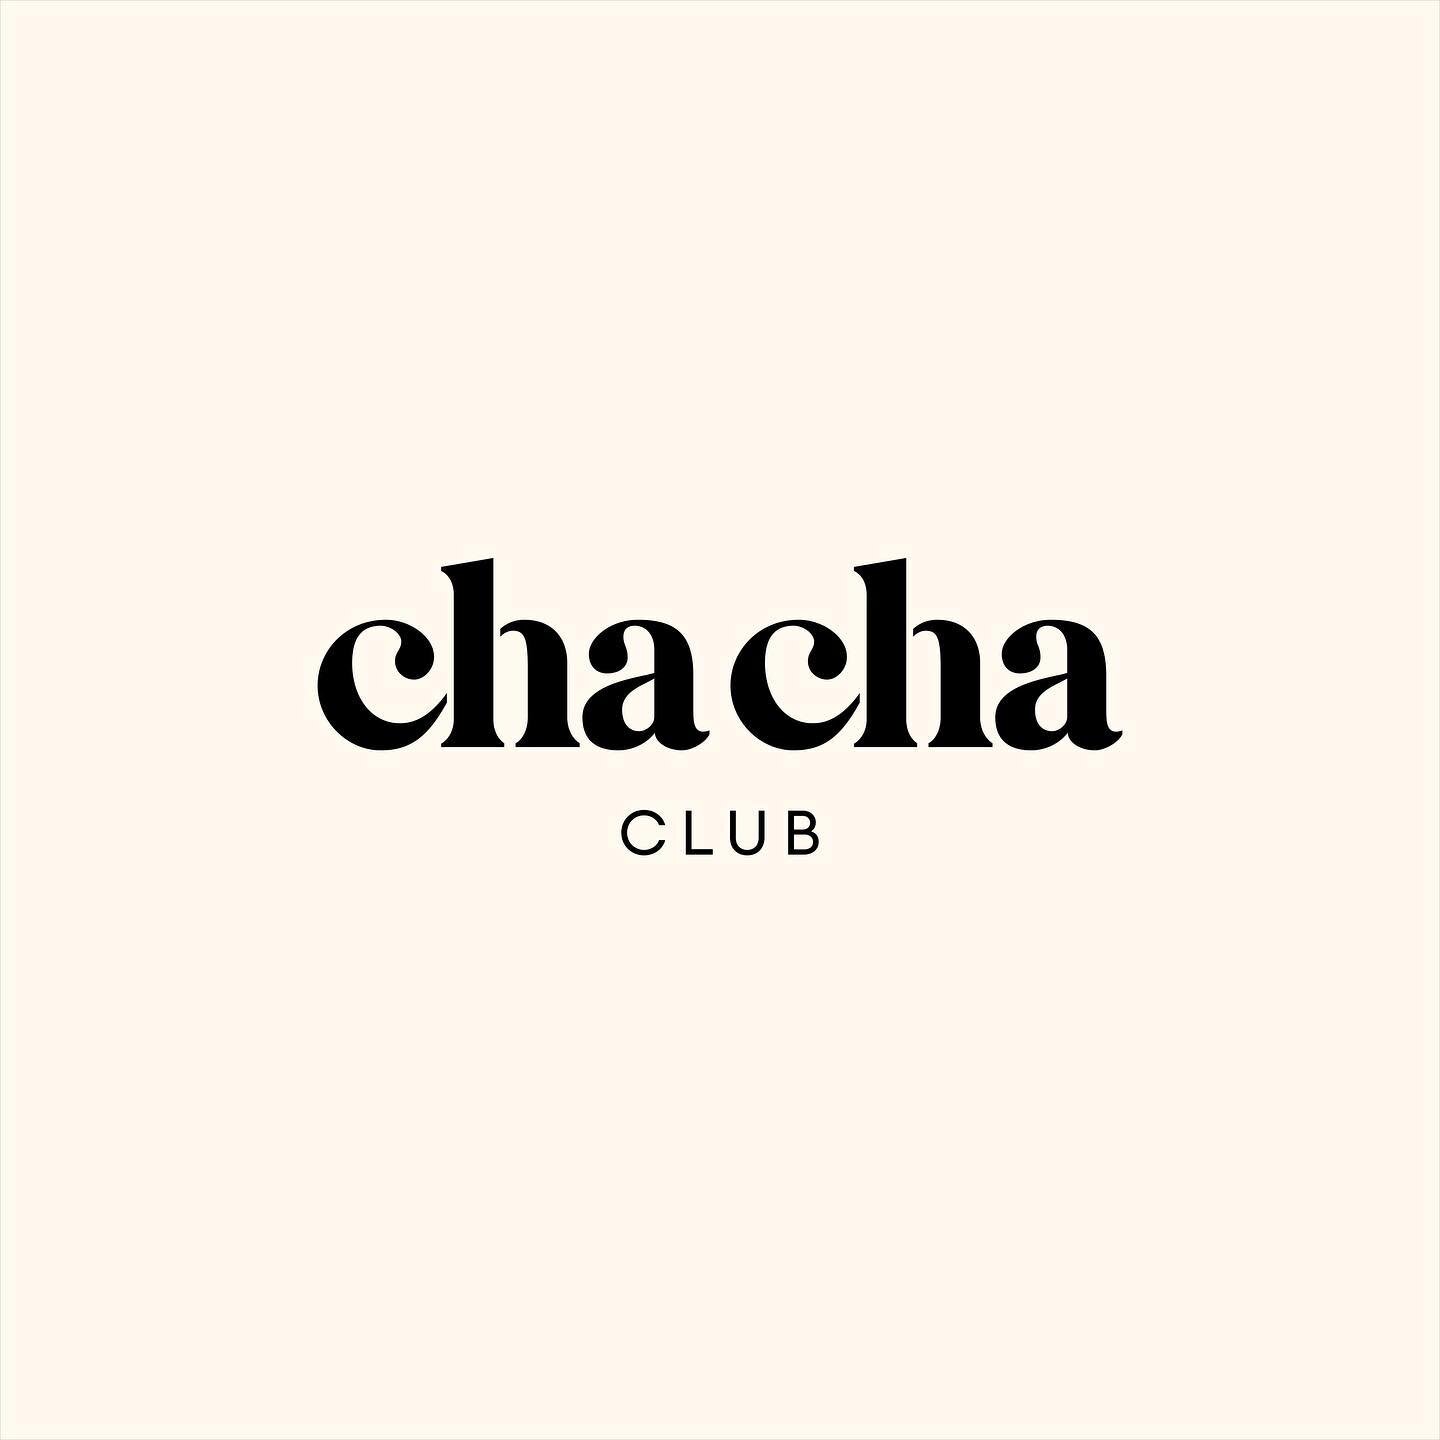 Branding for Cha Cha Club ✨

Scope of work:

- Brand Strategy 
- Brand Design - Web Design  - Brand Collateral

Last year, I had the pleasure of collaborating with the inspiring ResearchOps thought leader and instigator, Kate Towsey @katefamilton to 